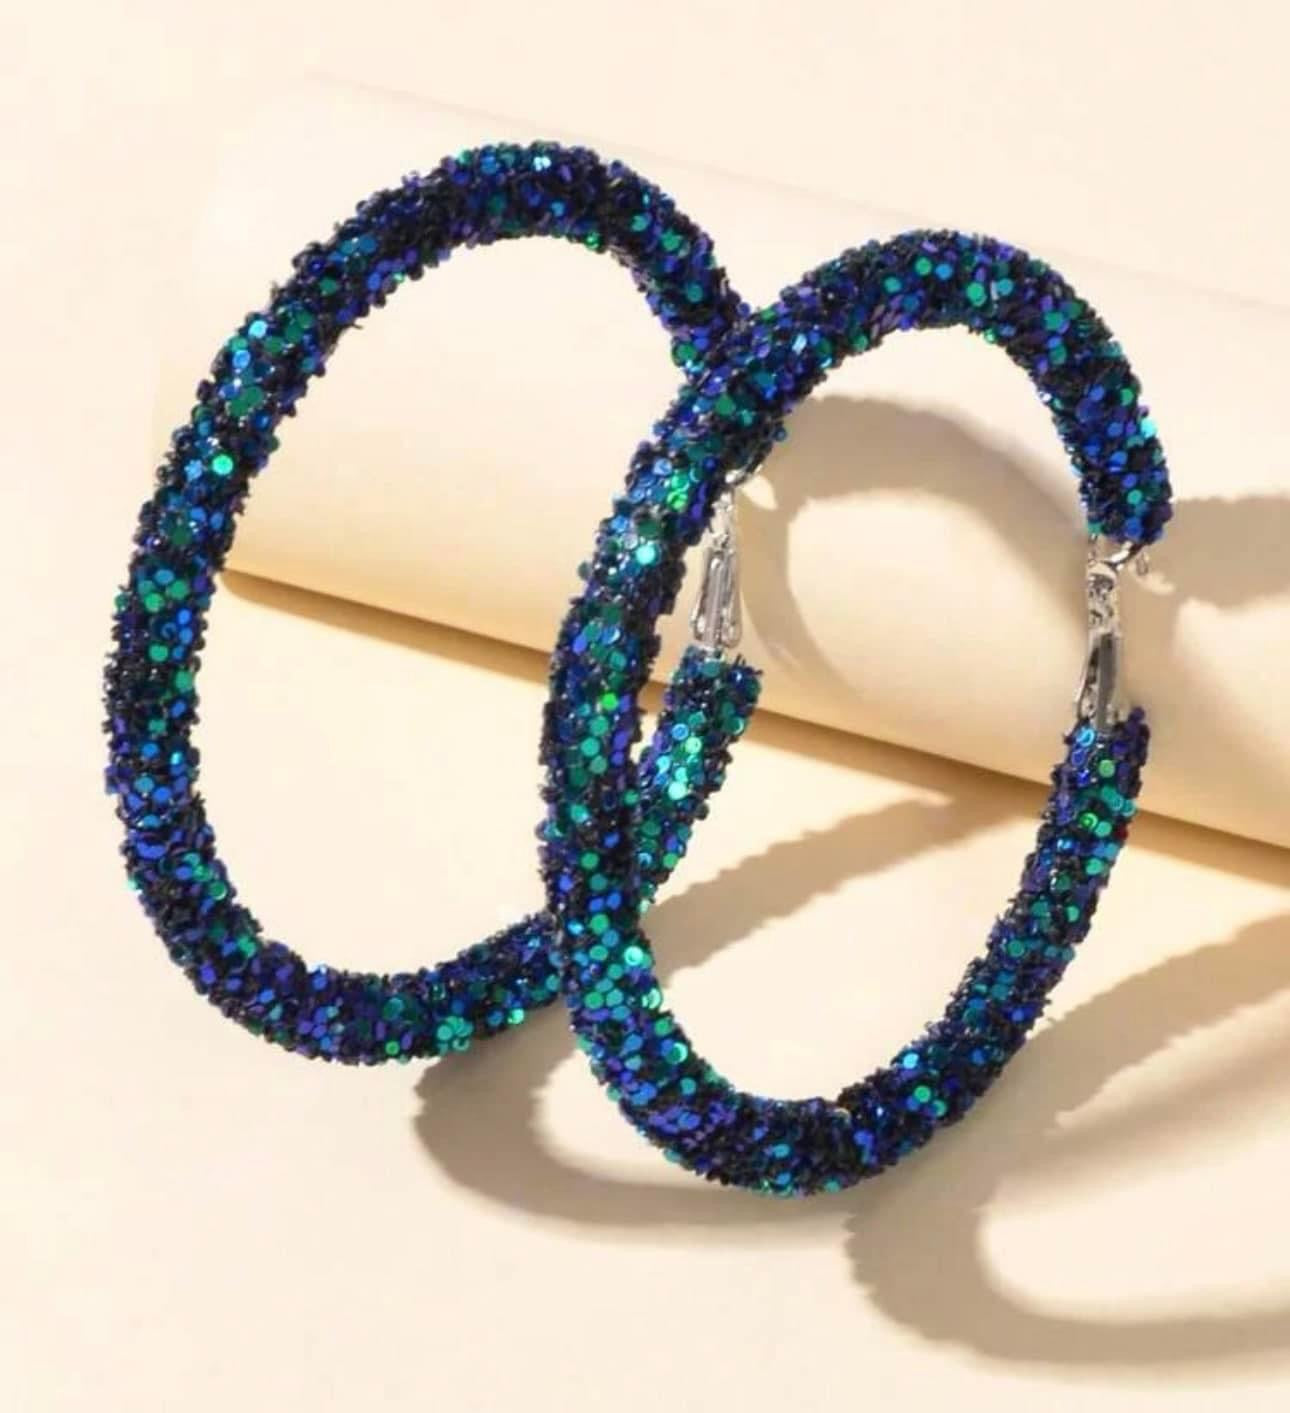 Blue and black hoops